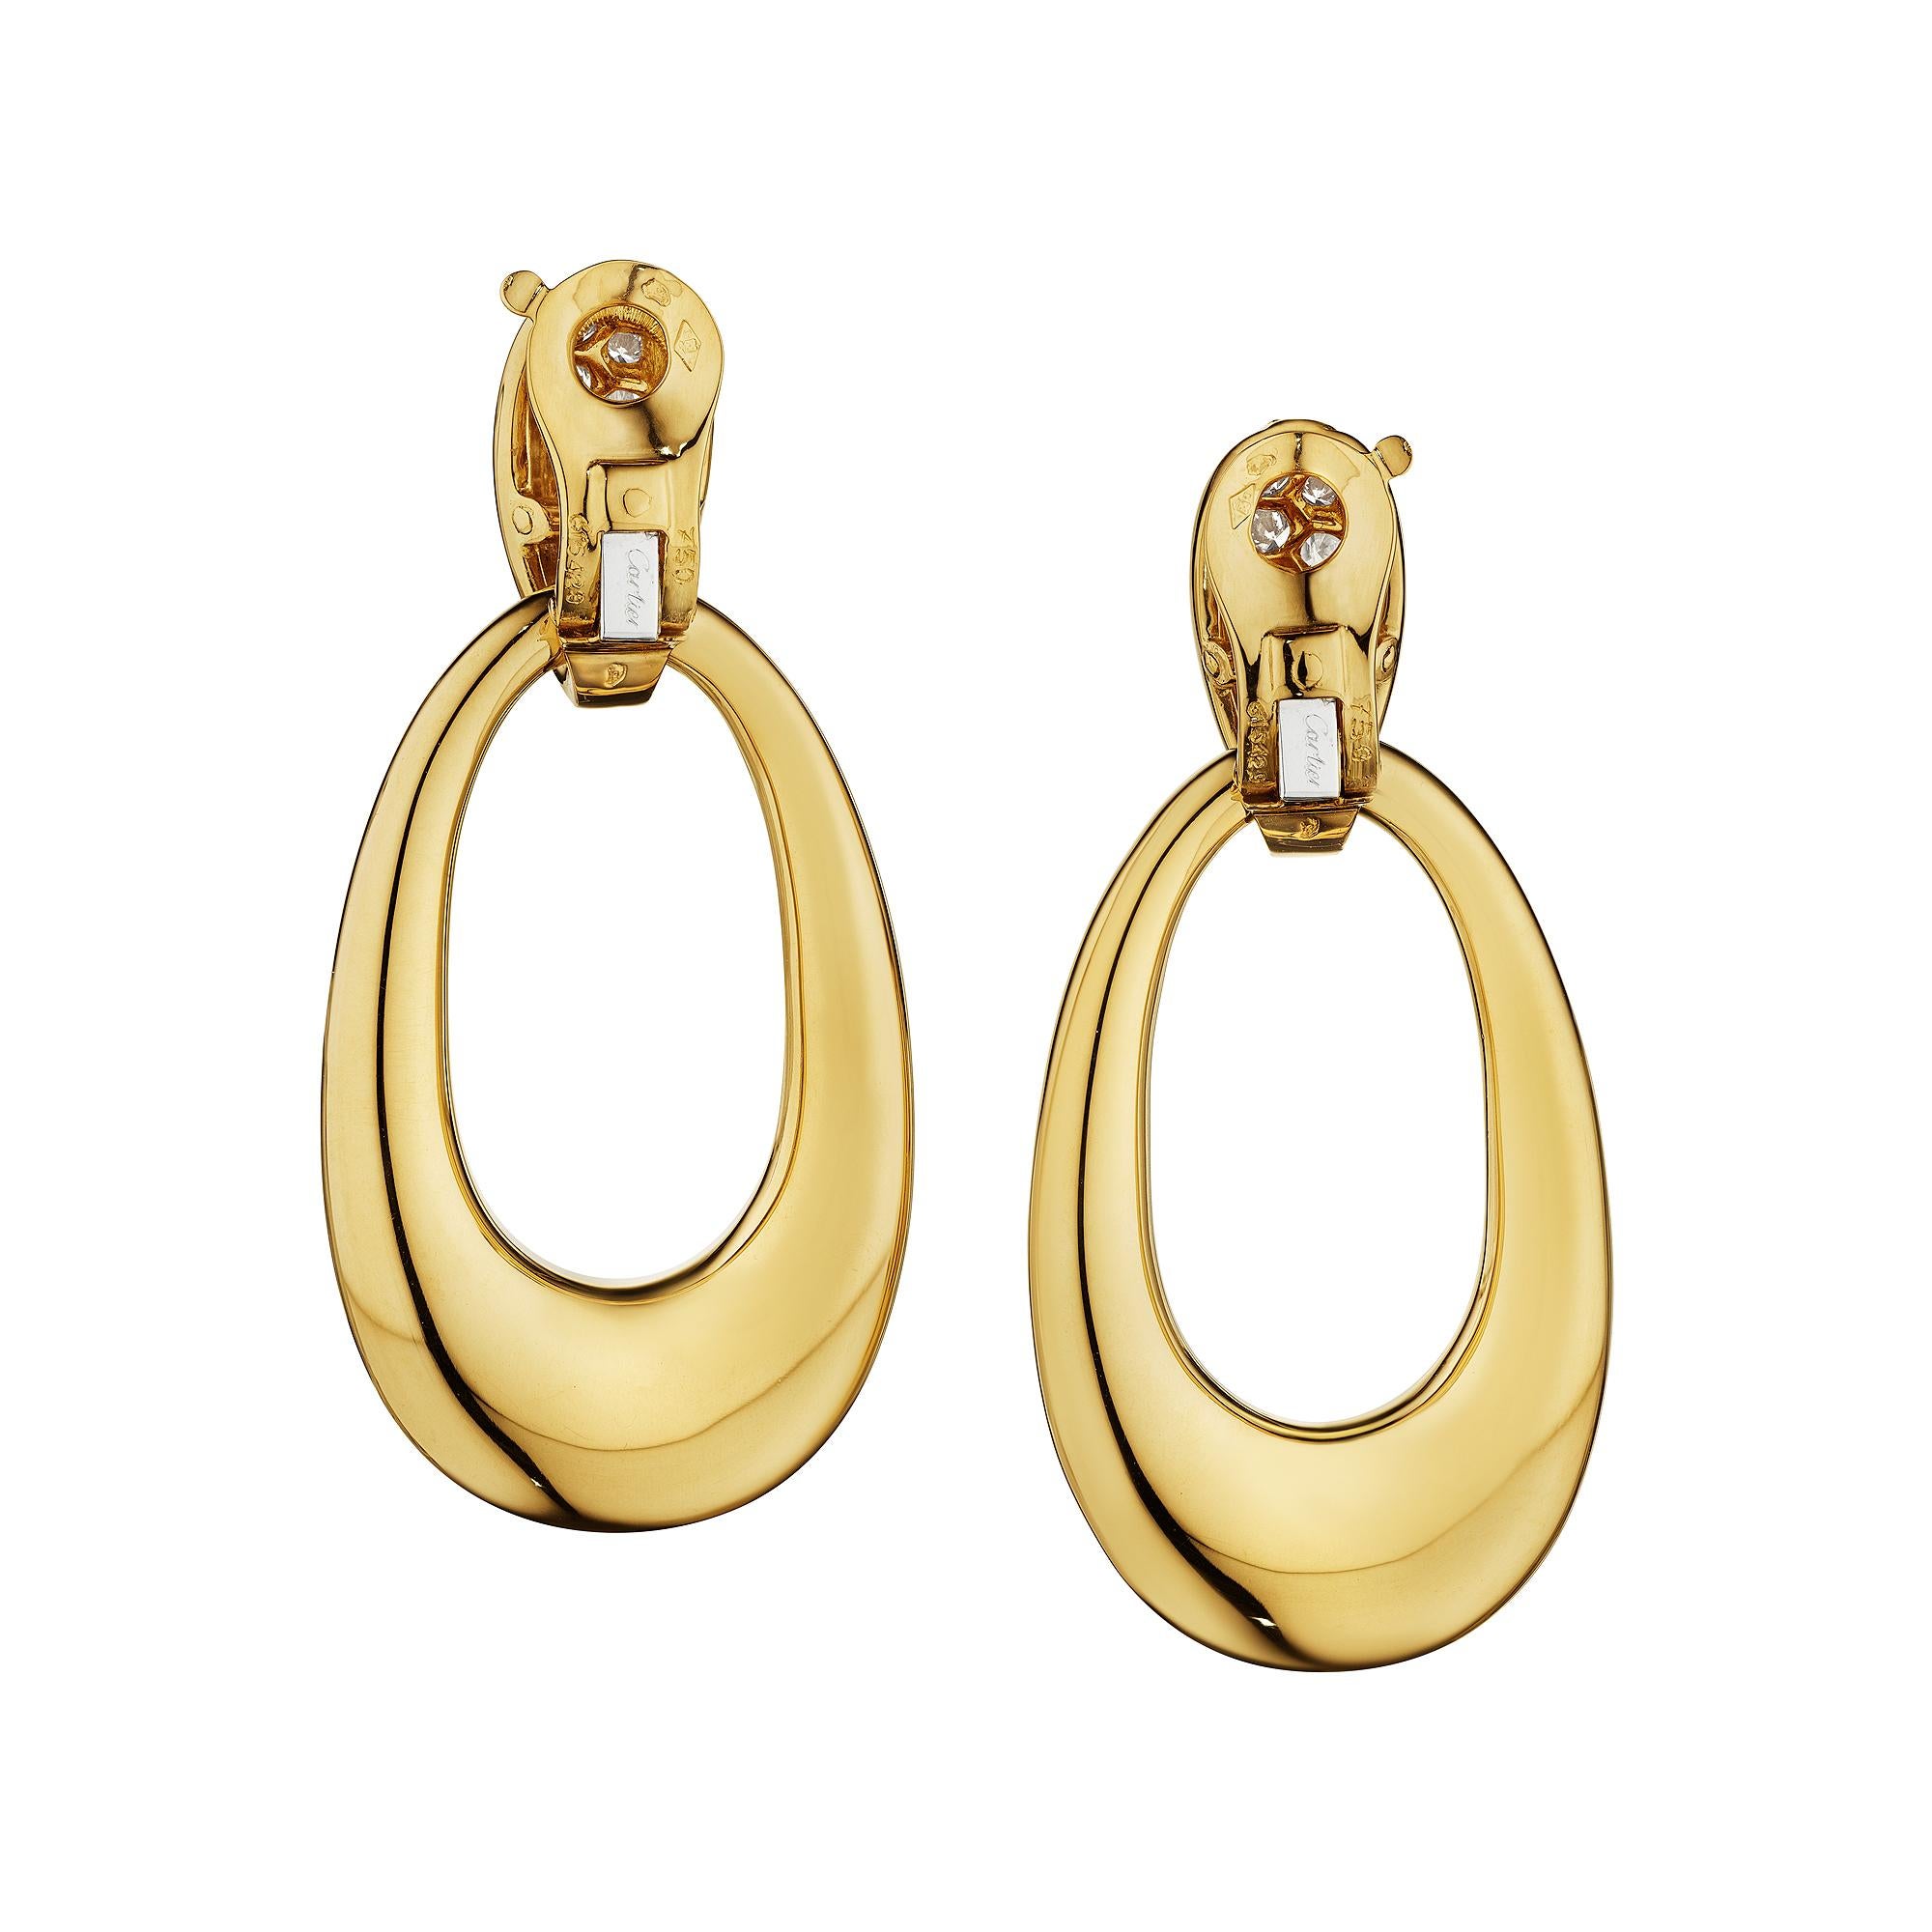 Knock knock who is there?  It is an exquisite pair of Cartier Paris Georges L'Enfant clip door knocker diamond yellow gold vintage earrings.  Sensuously swinging from small diamond top hoops, the 18 karat yellow gold large oval drop loops can be